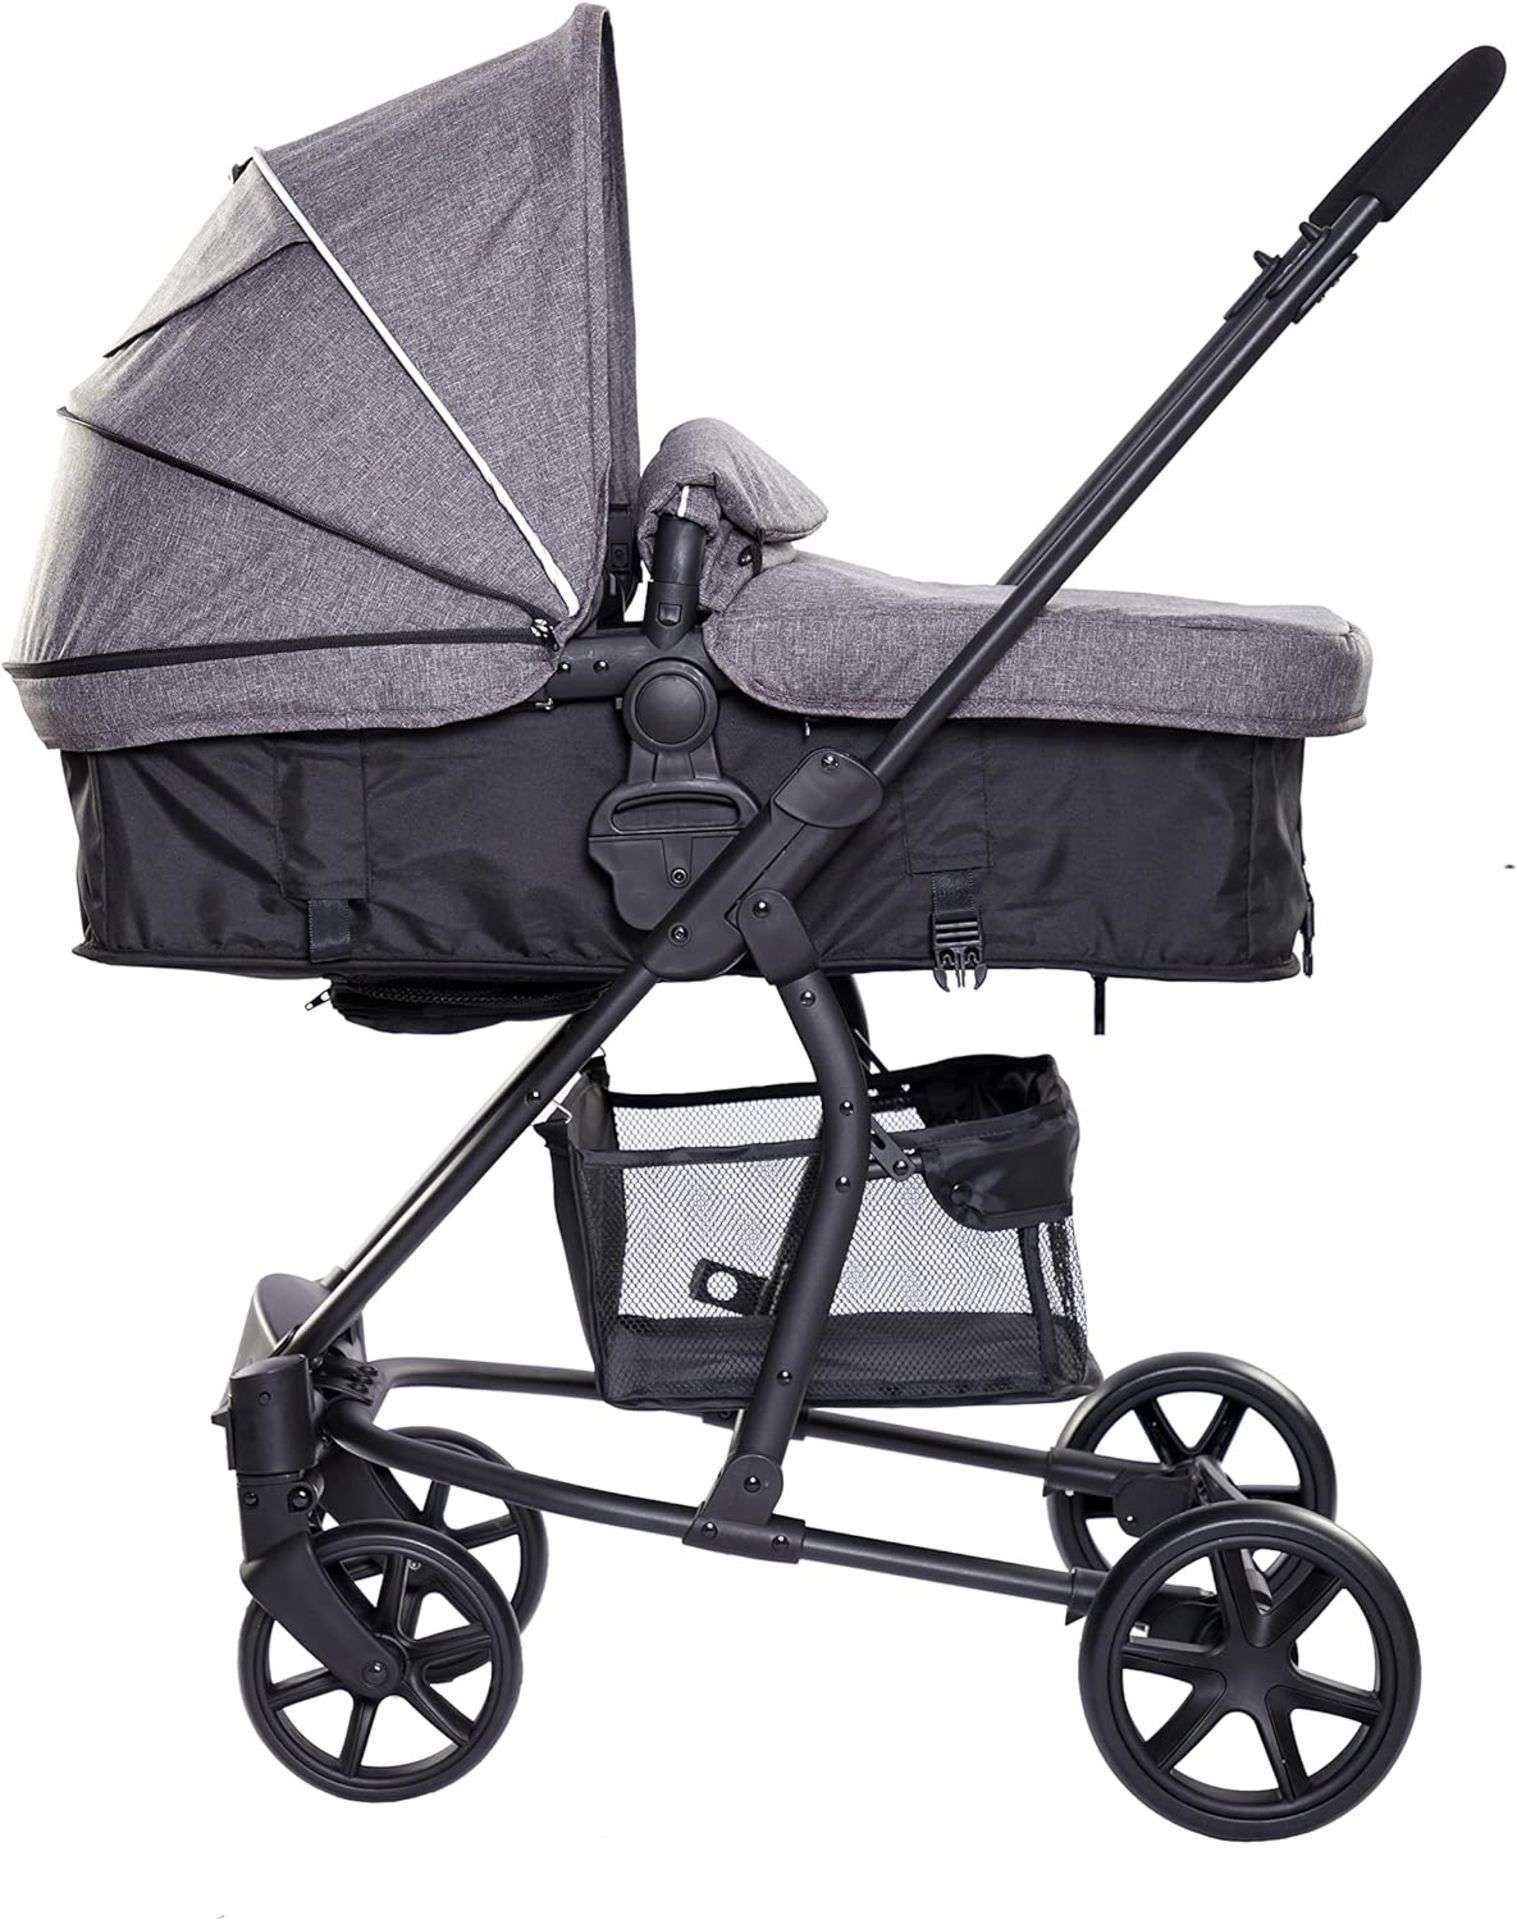 TRADE LOT 5 X BRAND NEW RICCO BABY 2 IN 1 FOLDABLE BUGGY STROLLER PUSHCHAIR GREY R18-7